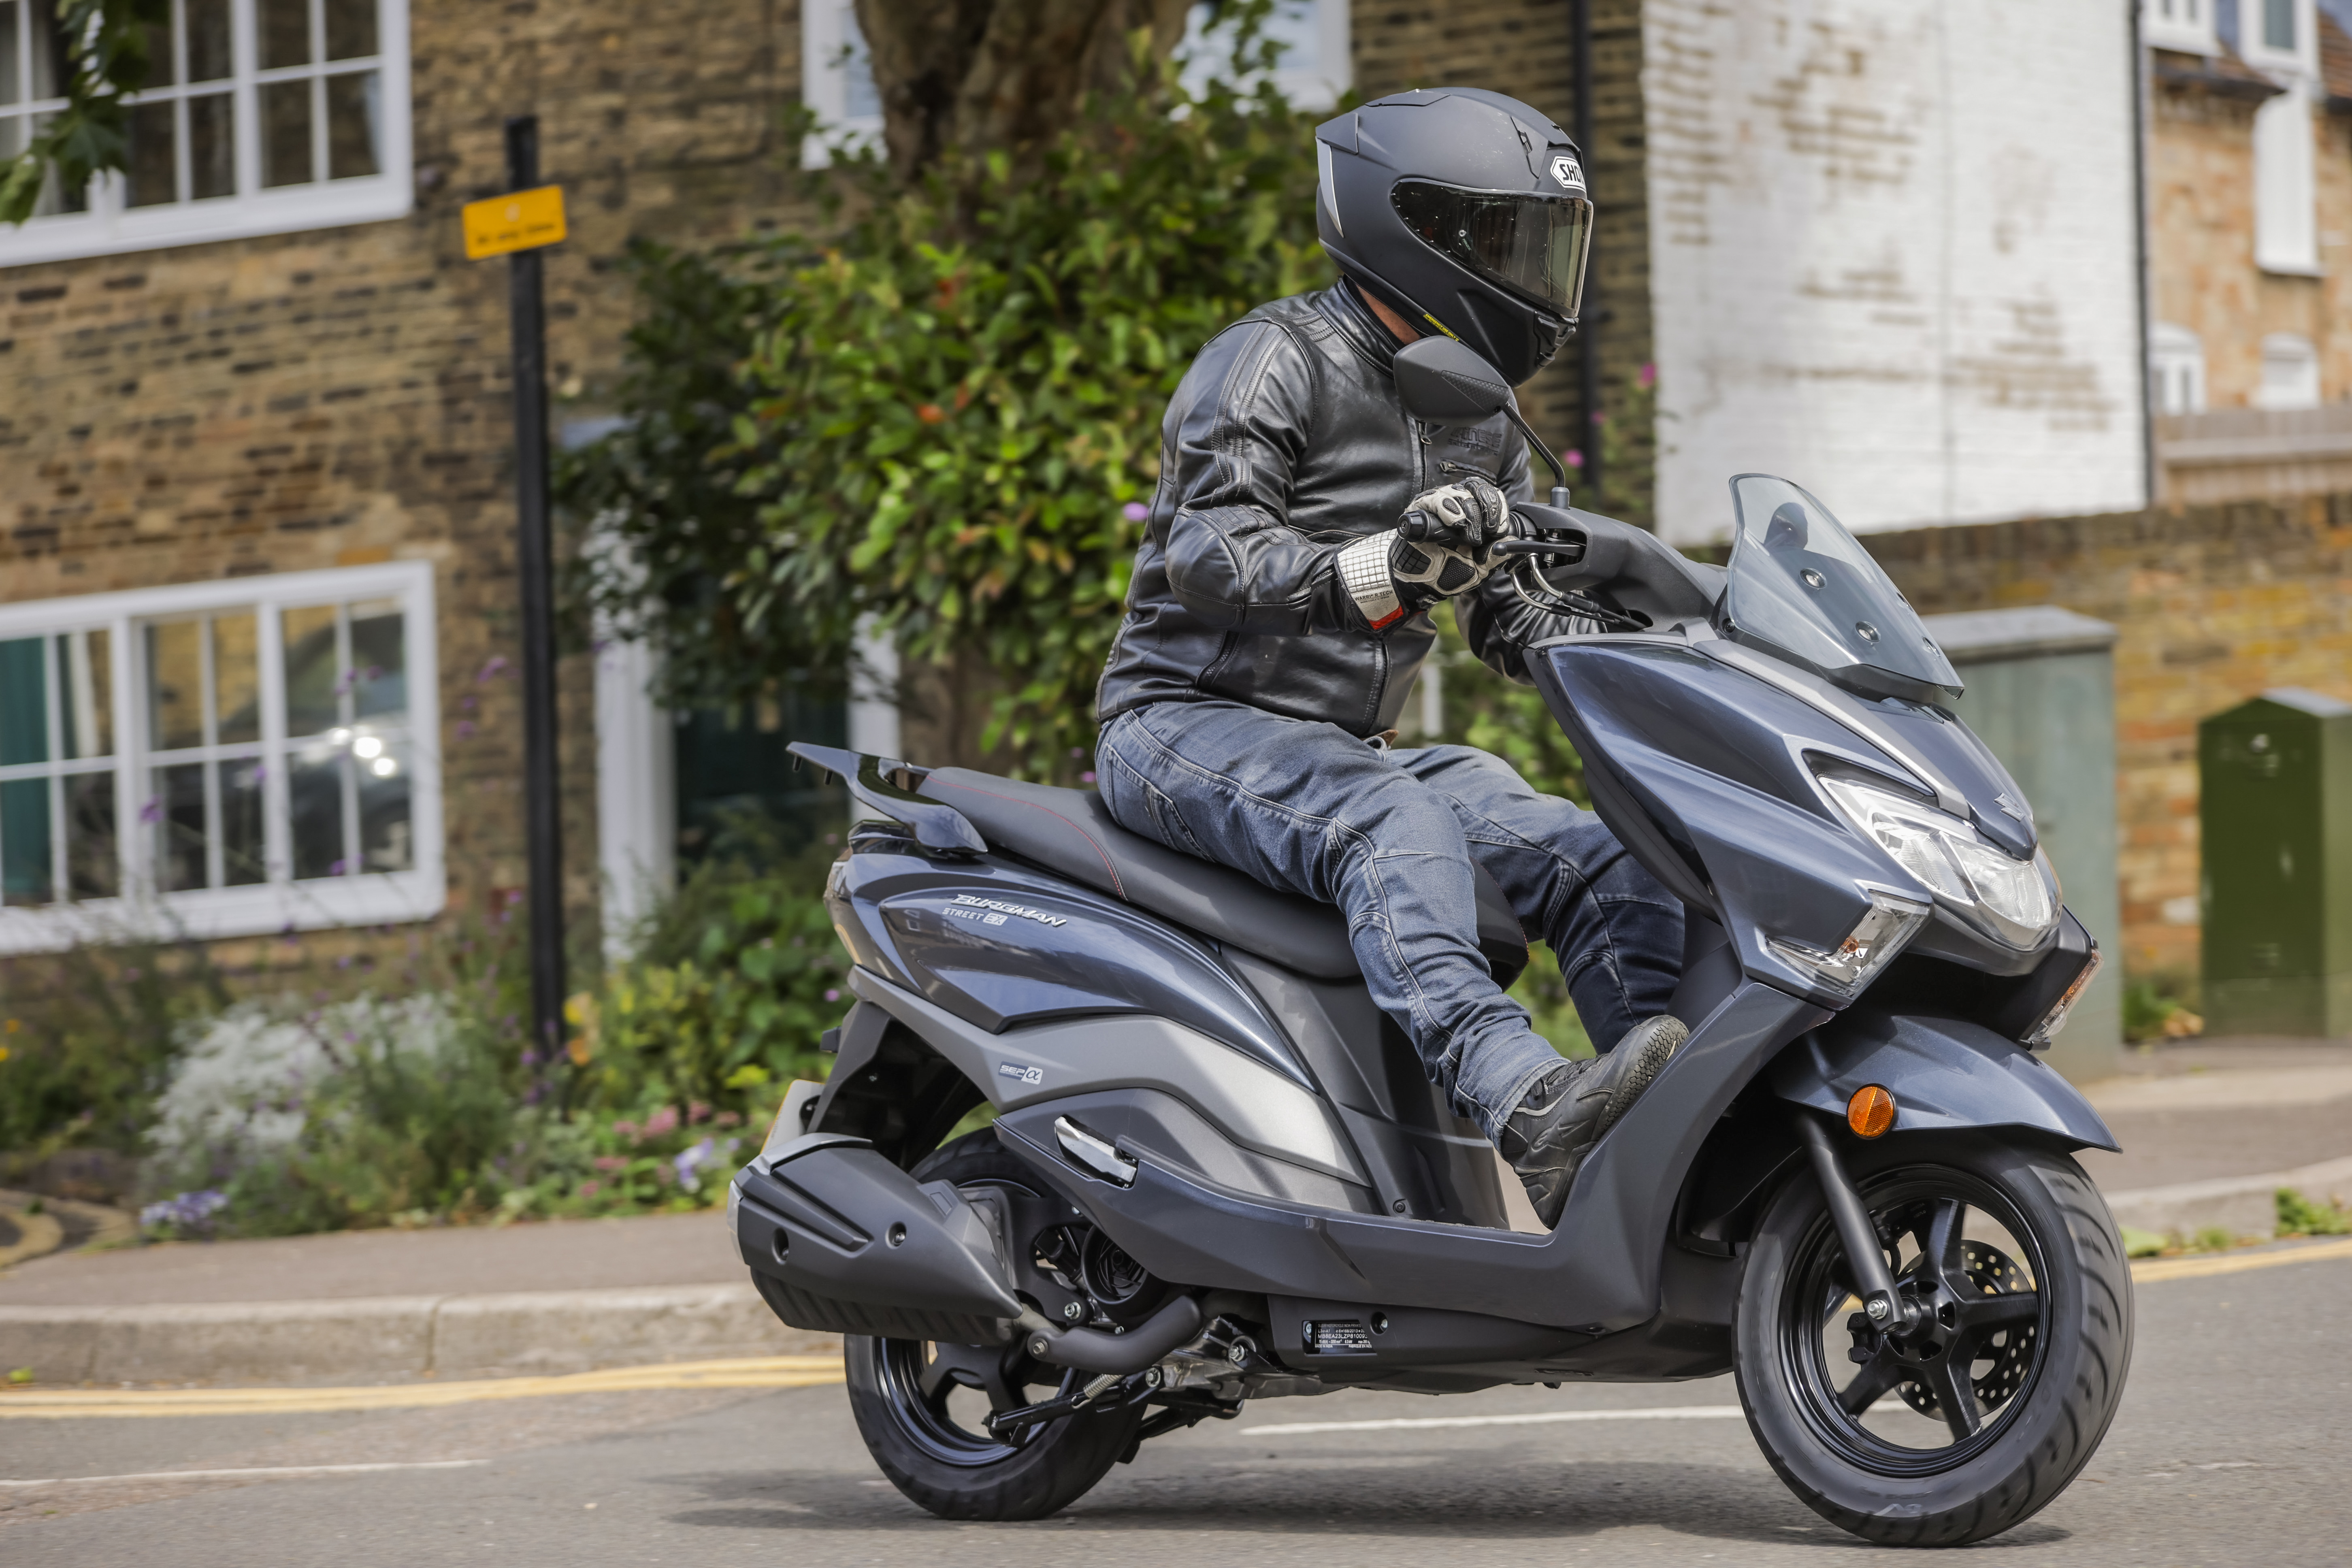 Suzuki Burgman 125 EX 125 scooter new used for sale review